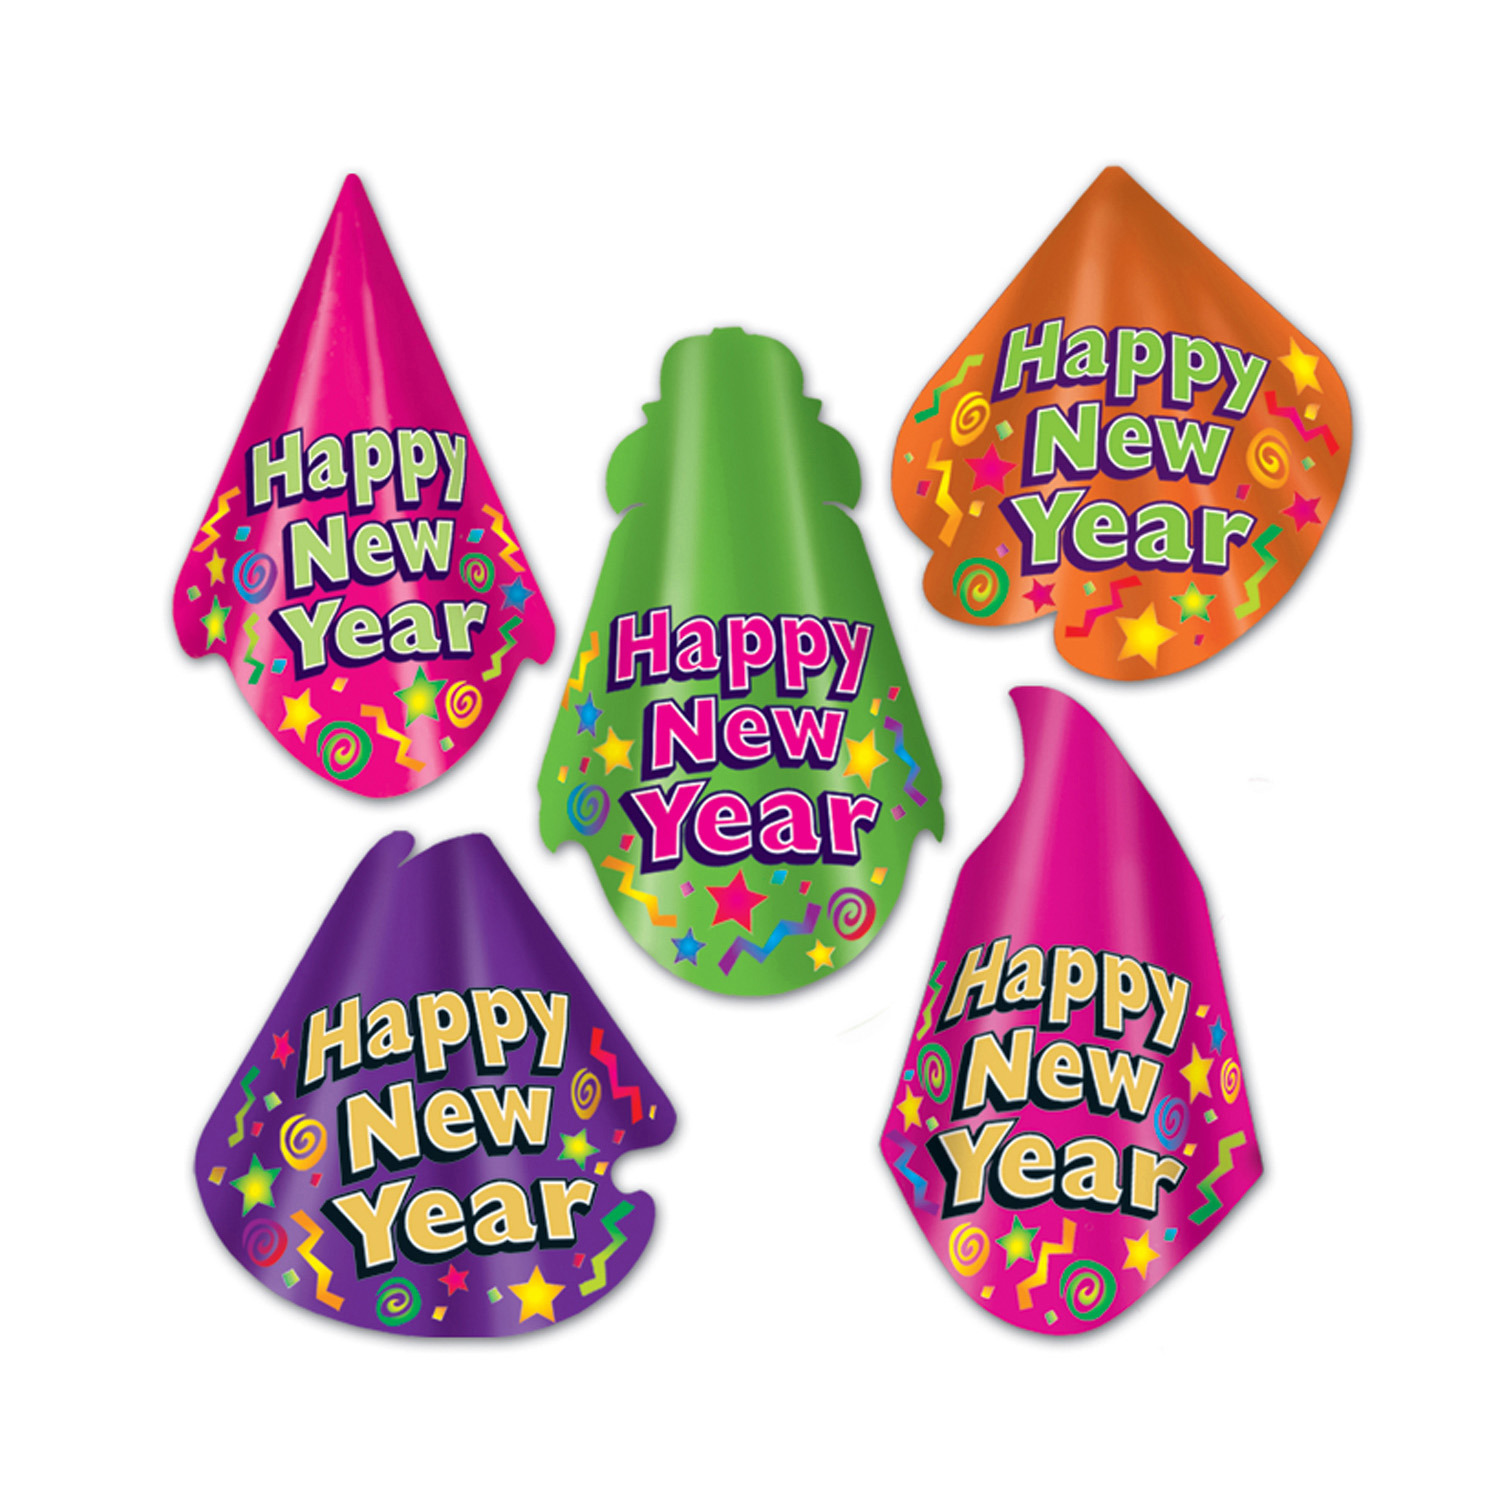 Bright colored party hats with festive designs and the words "Happy New Year".